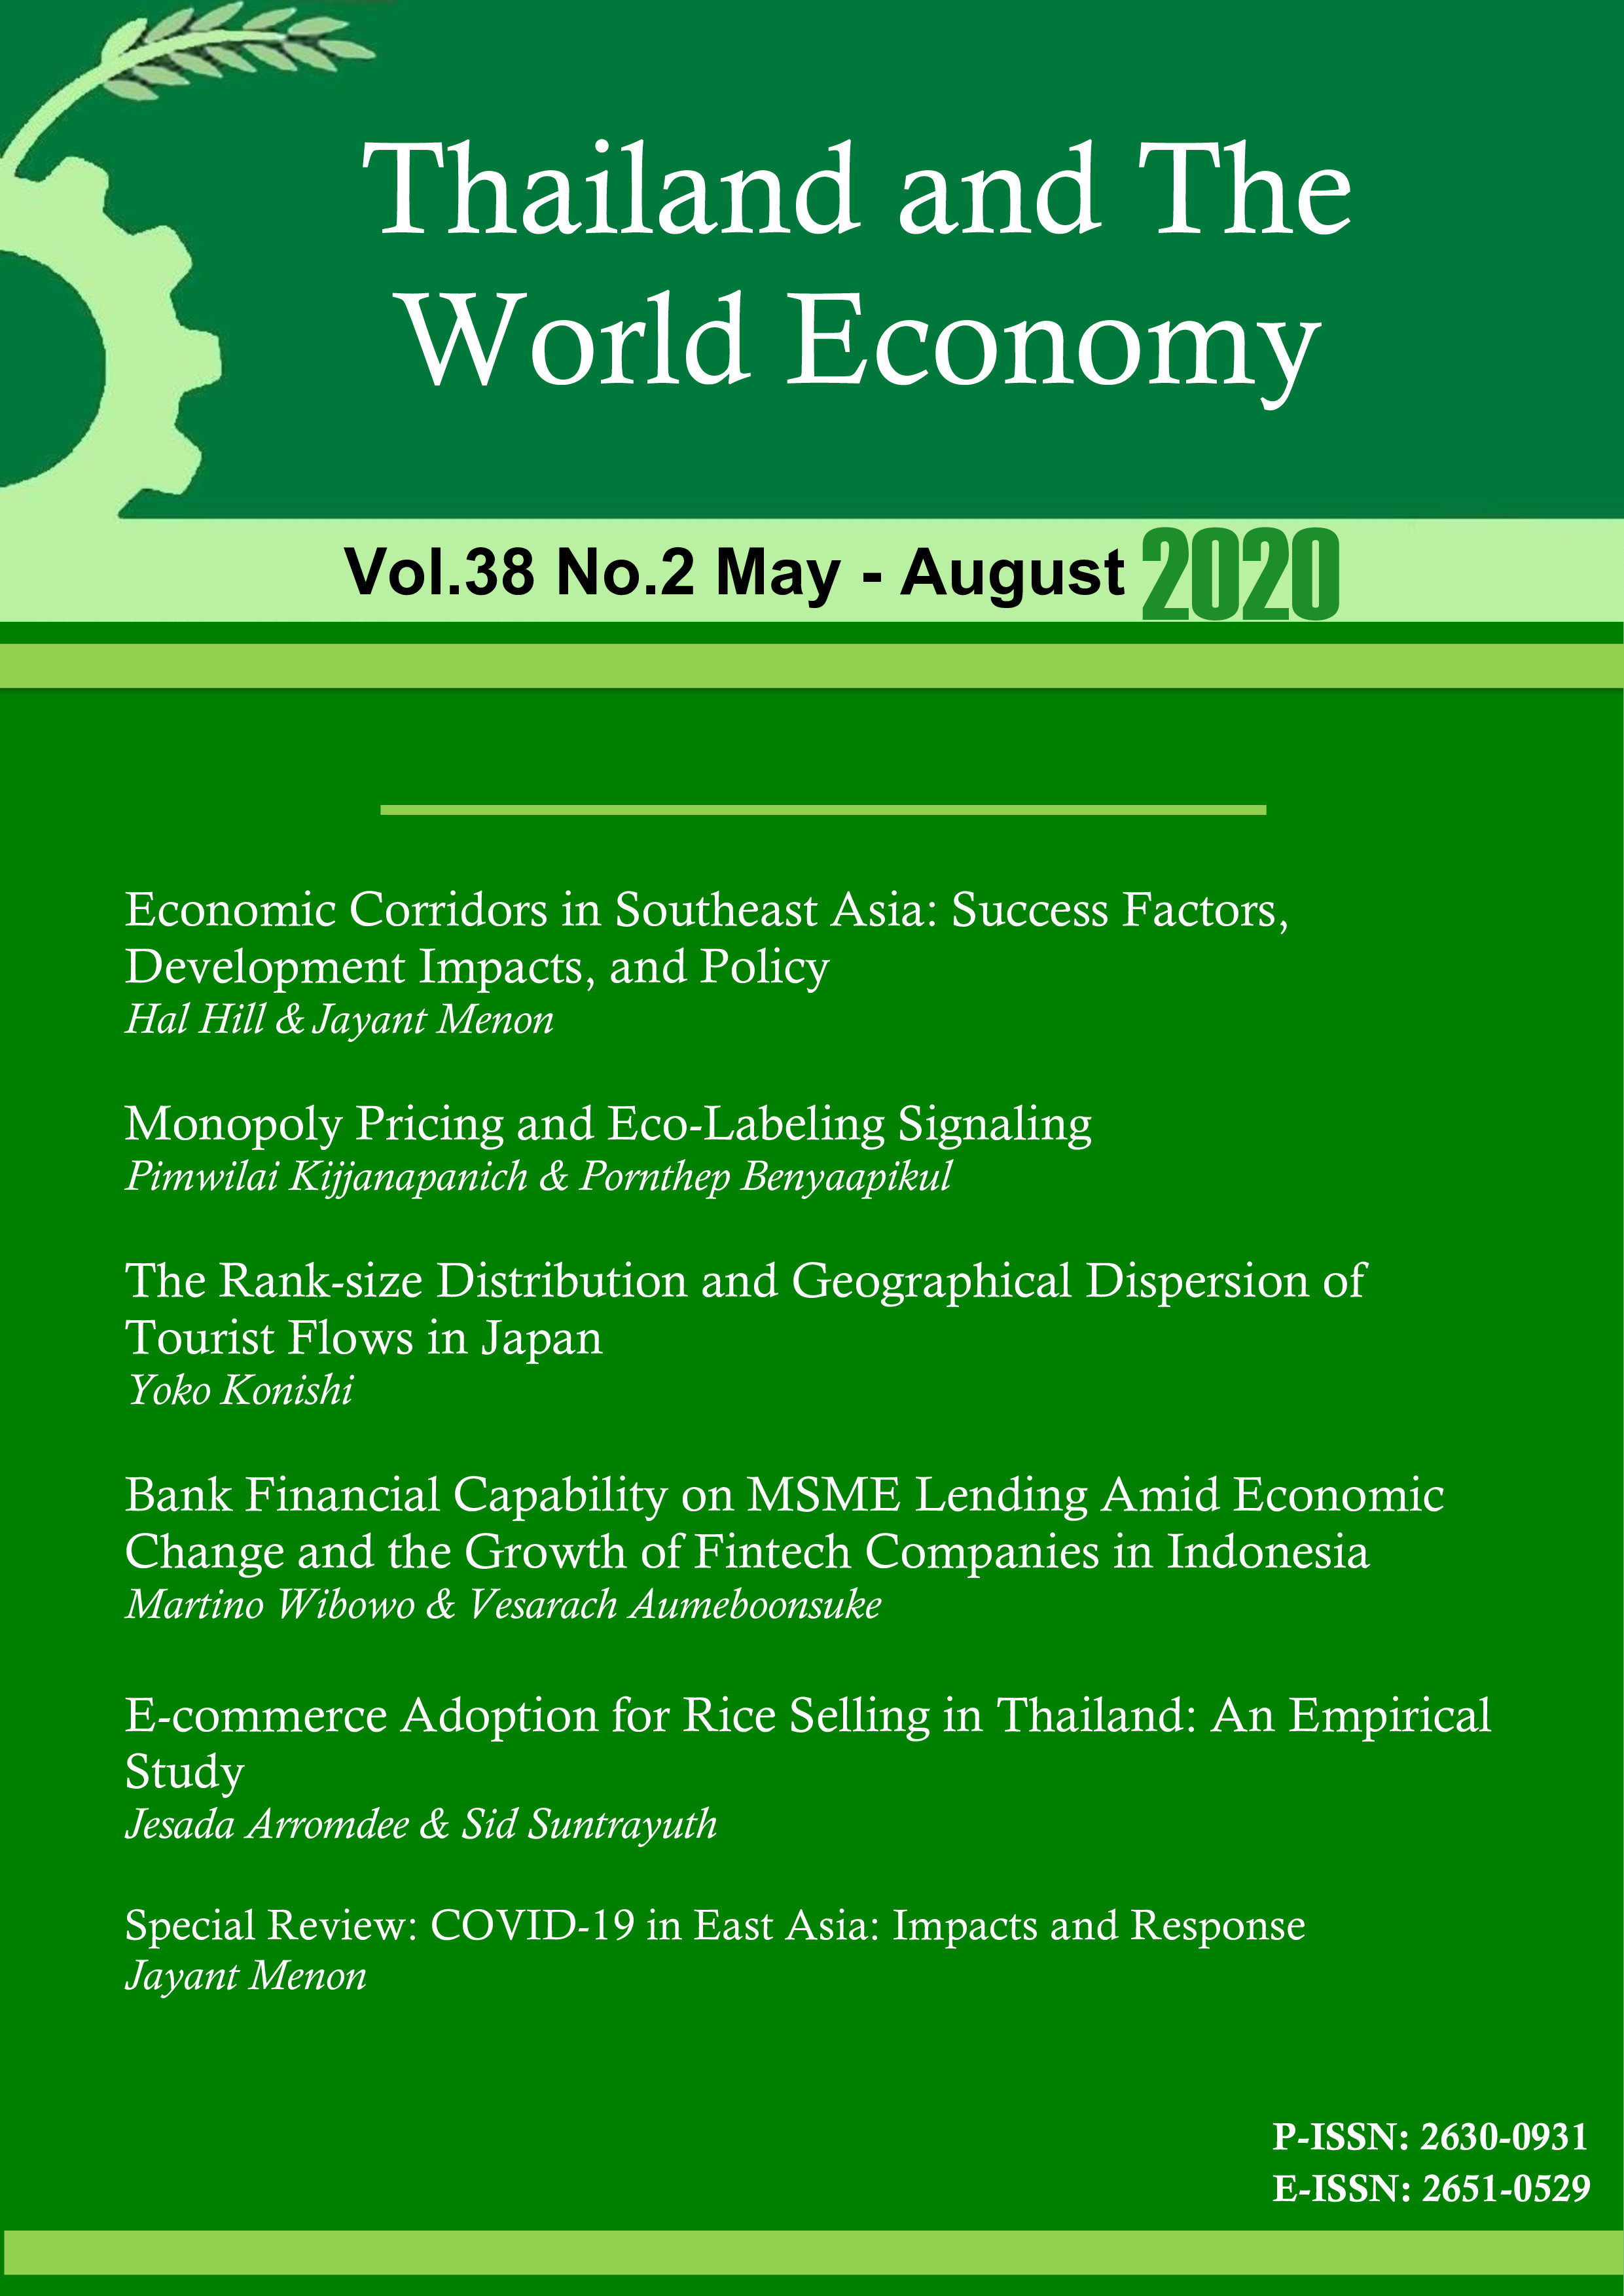 					View Vol. 38 No. 2 (2020): Thailand and the World Economy
				